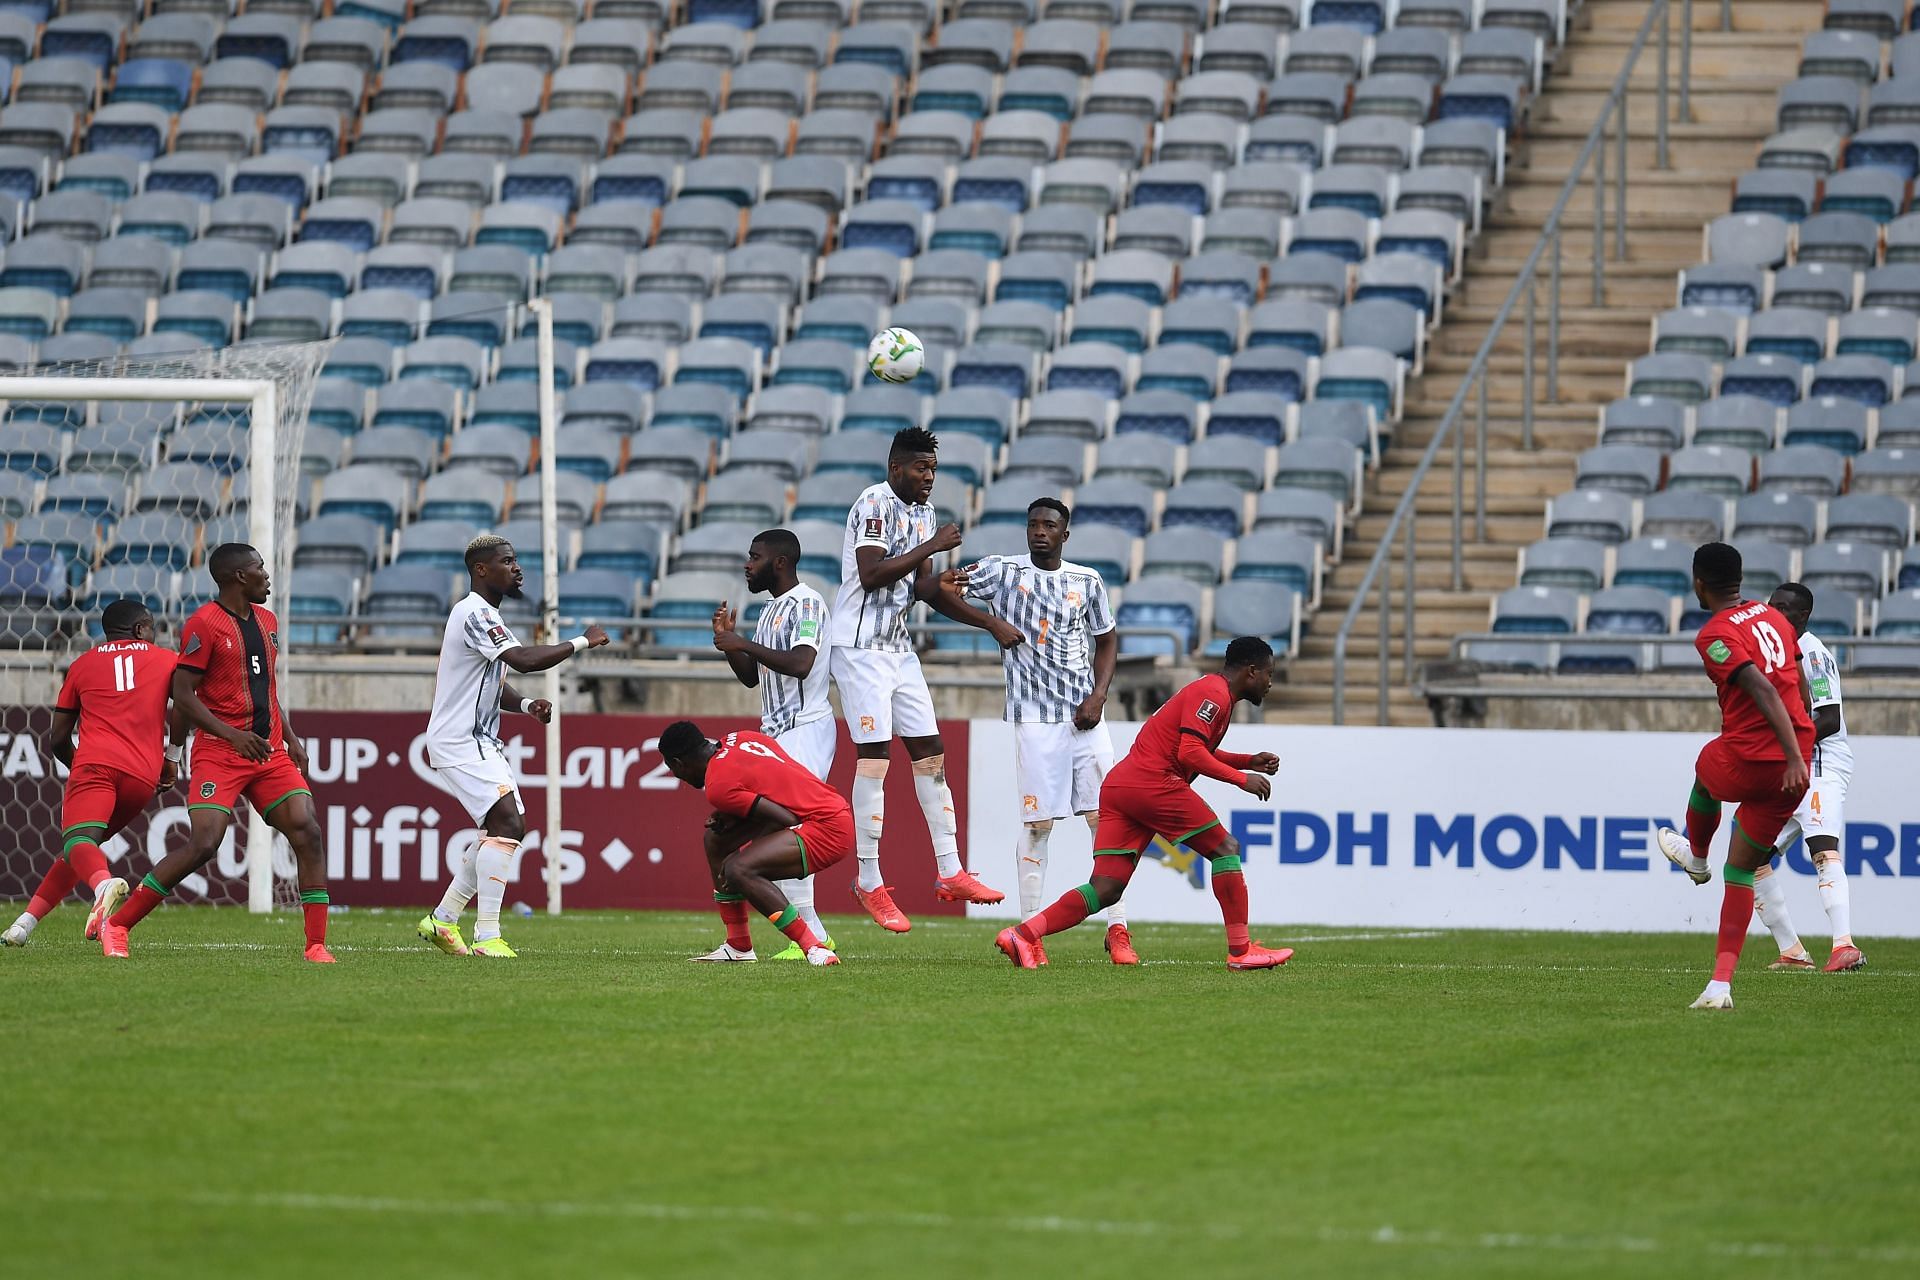 Malawi will play Zimbabwe on Friday - Africa Cup of Nations